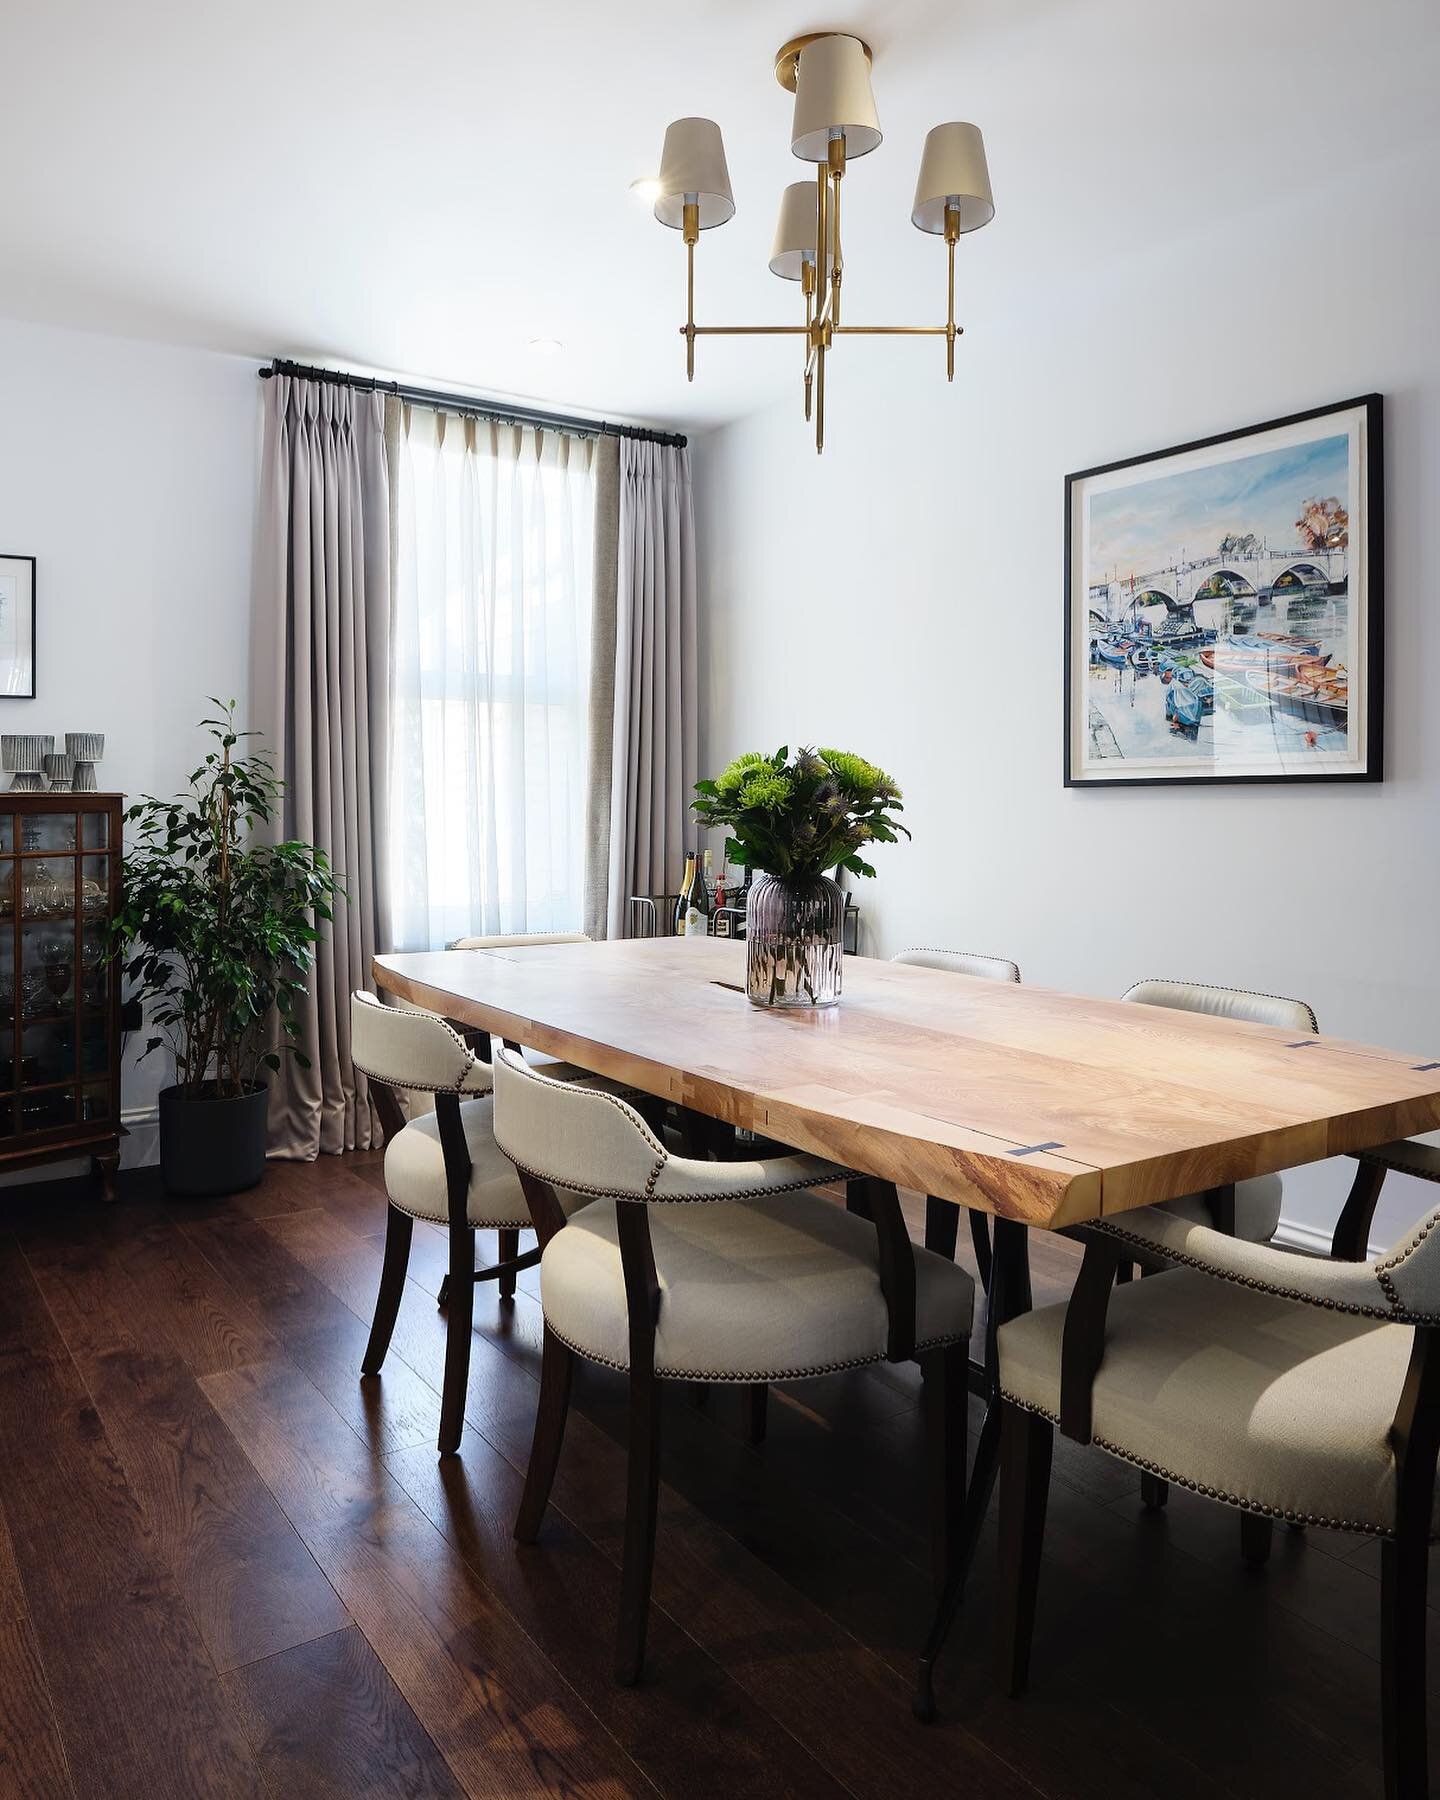 Gorgeous dining space and handmade furniture from @nicolamerrittinteriordesign 's Isleworth Terrace project